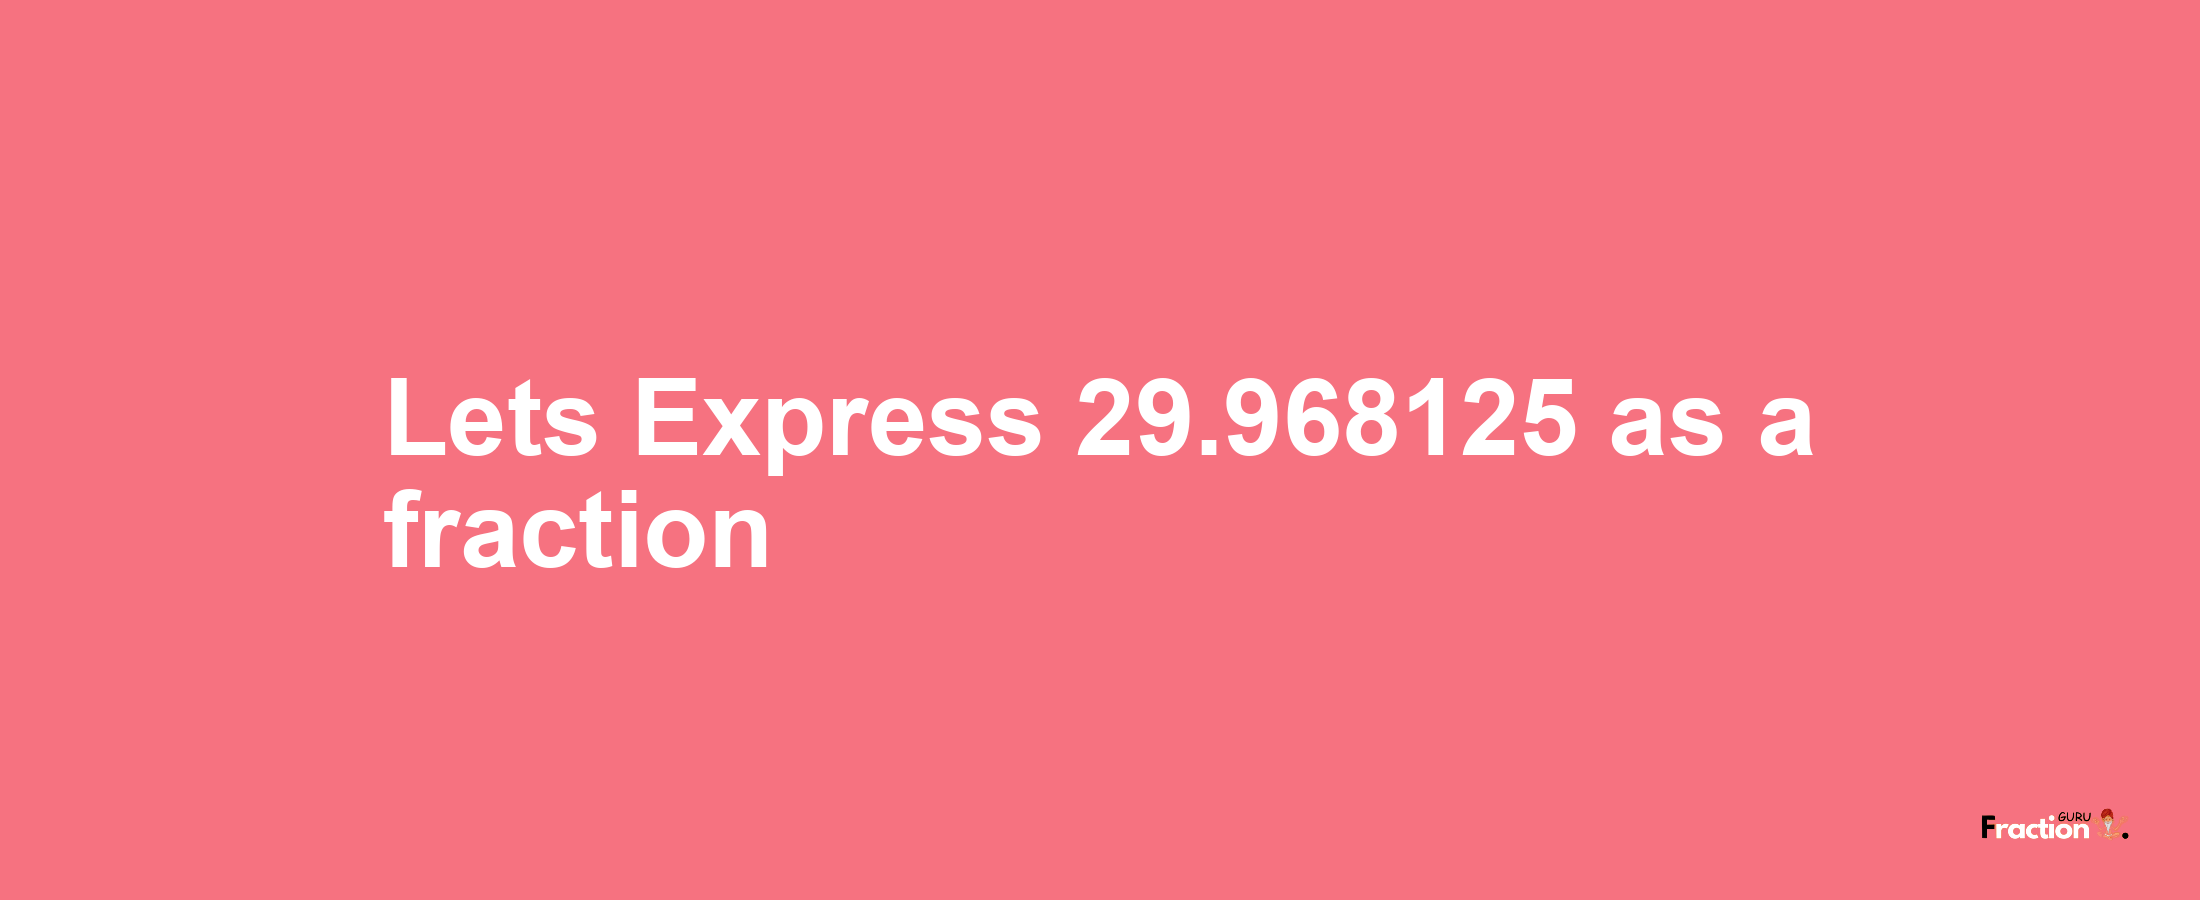 Lets Express 29.968125 as afraction